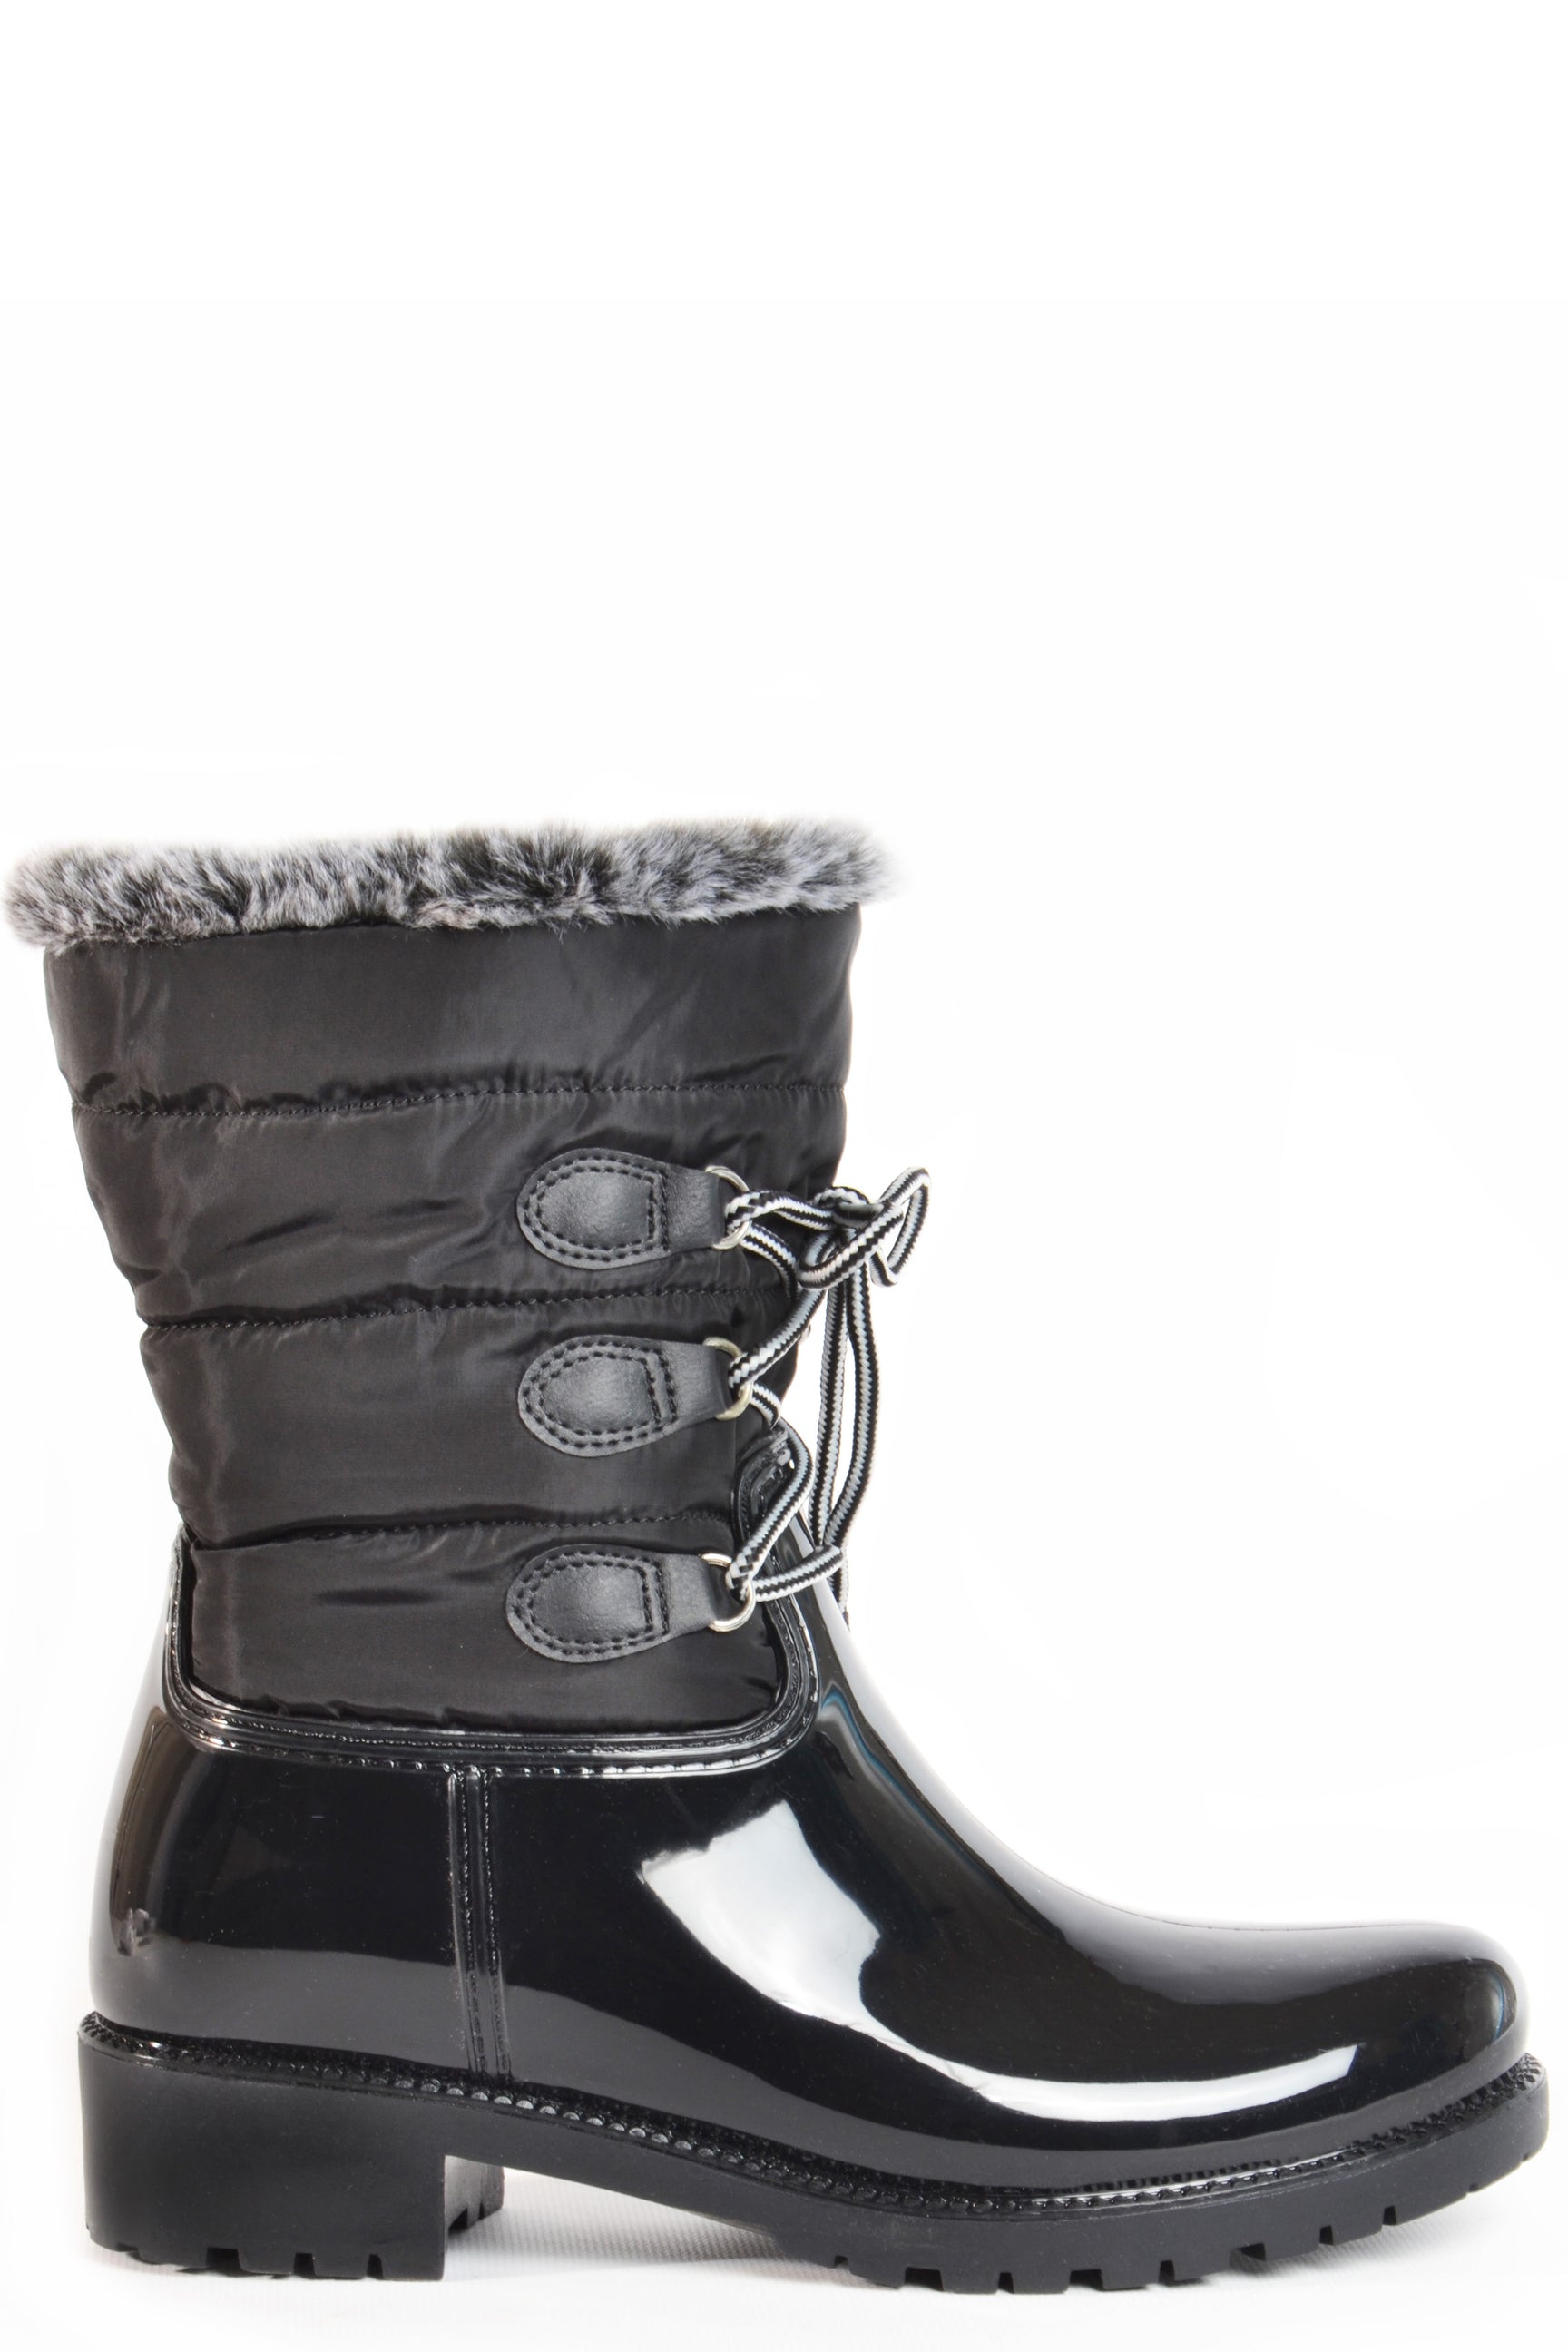 Shop all categories of däv rain boots, shoes and accessories – Page 2